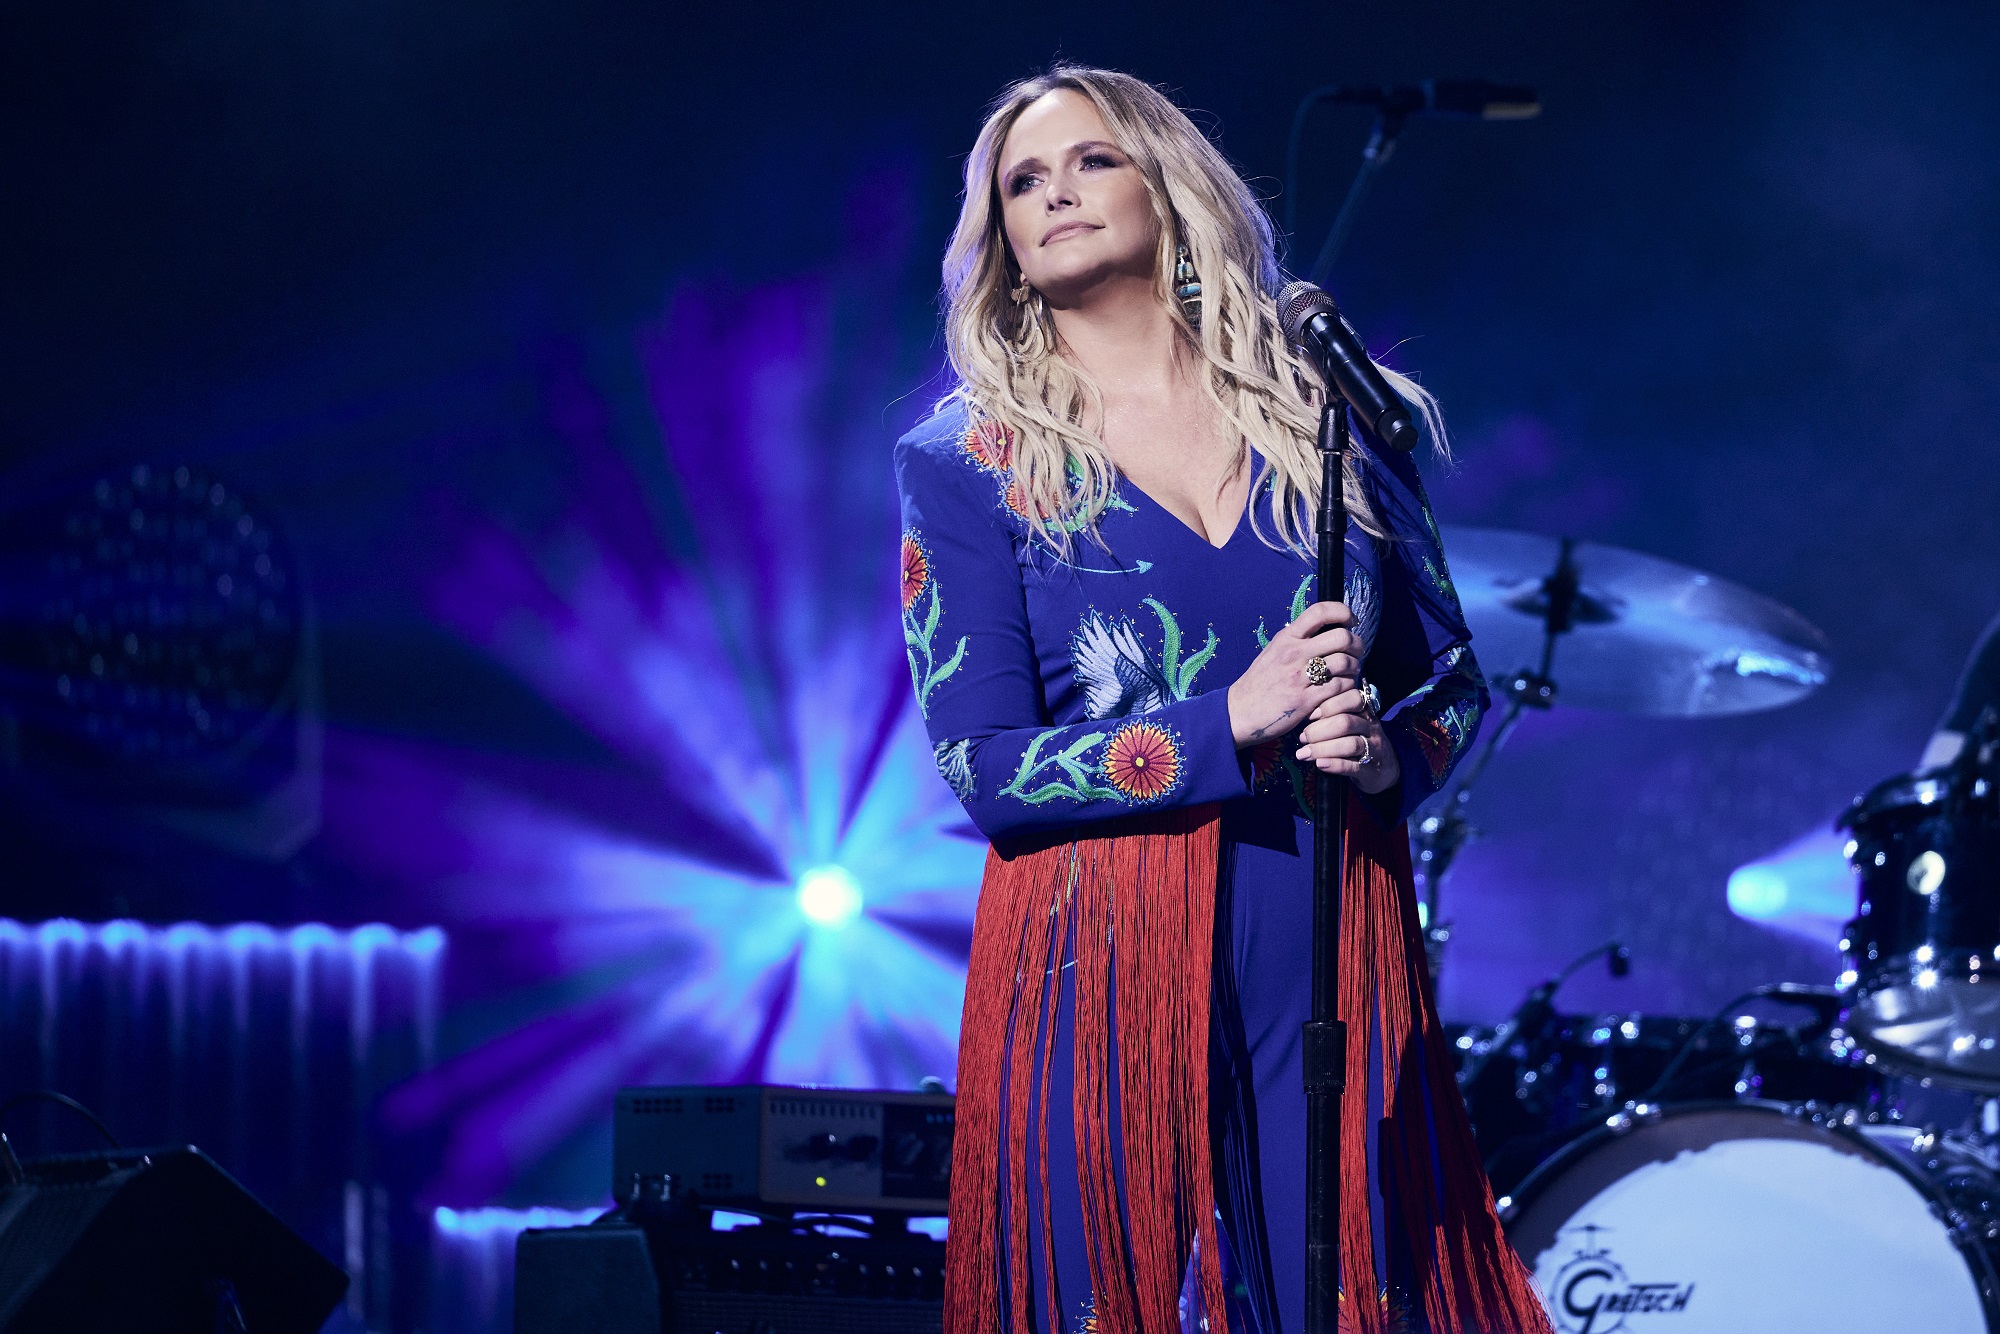 Miranda Lambert stands on stage holding a microphone stand